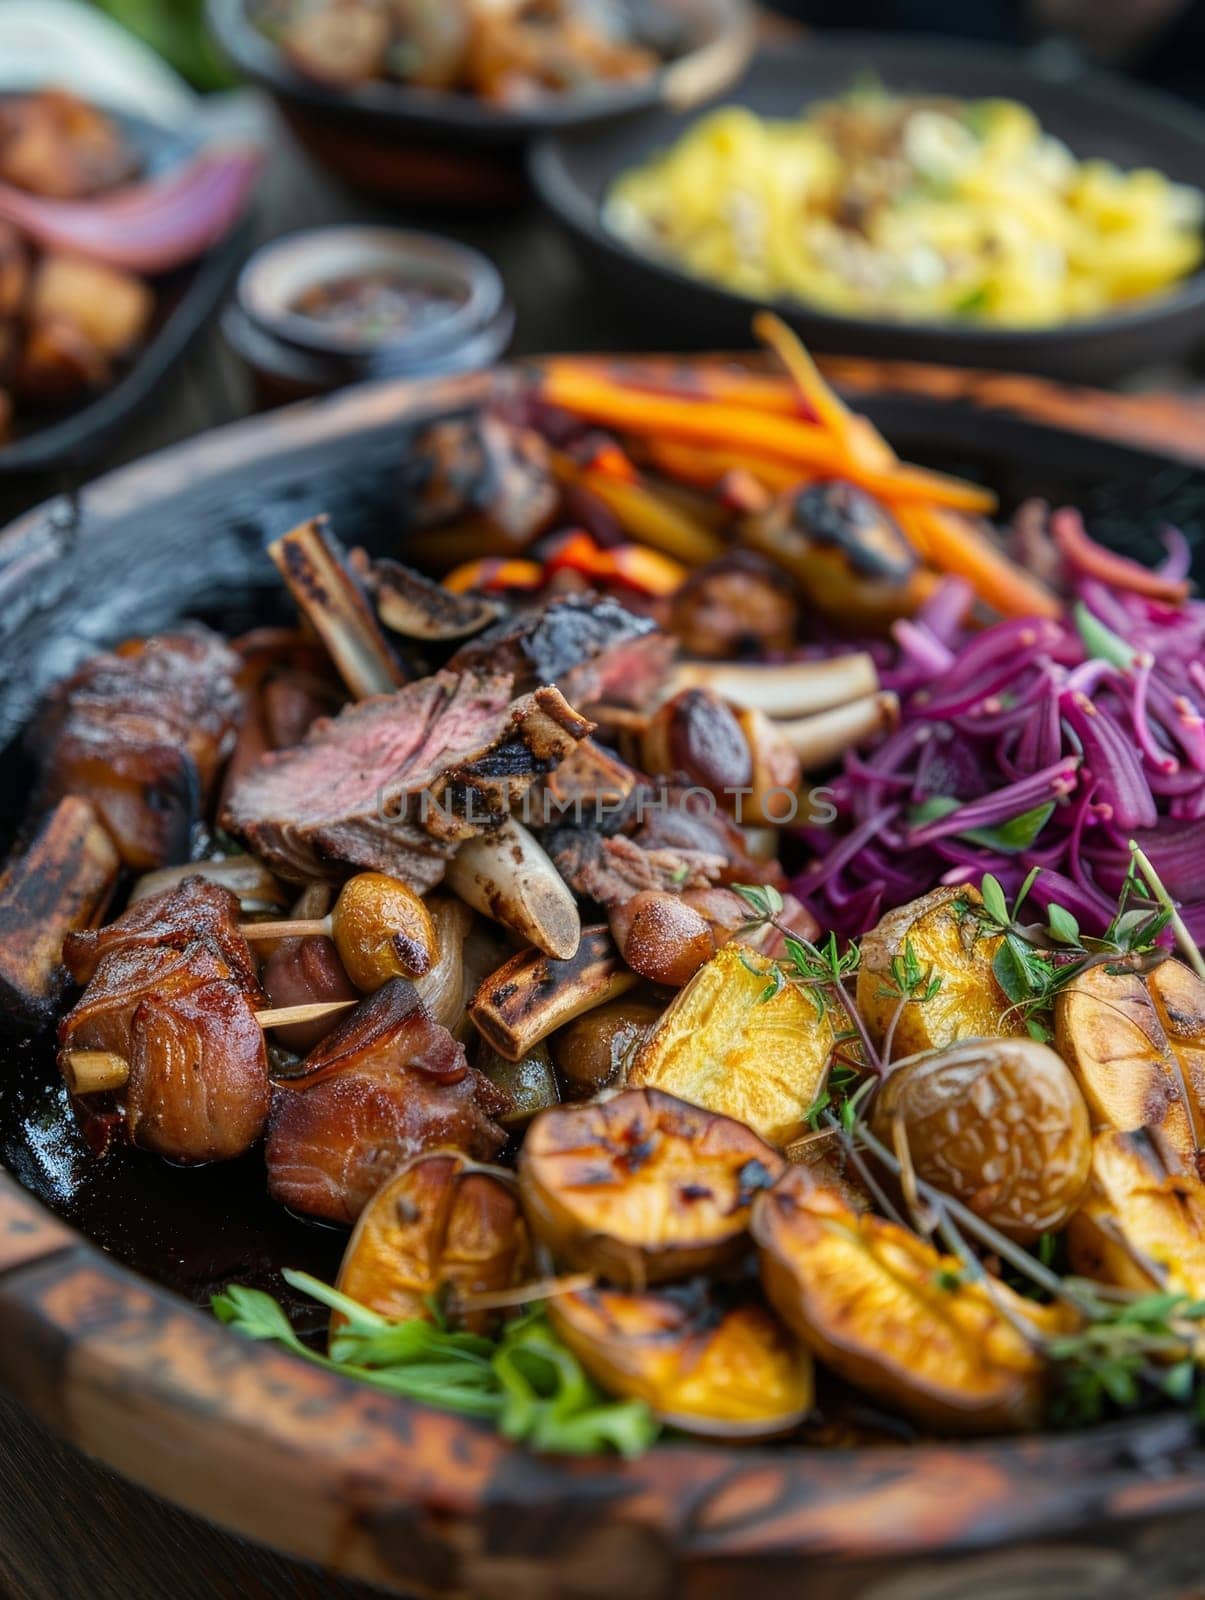 A traditional Maori hangi dish from New Zealand, featuring meats and vegetables slow-cooked in an underground earth oven, displayed on a rustic platter for an authentic and cultural culinary. by sfinks